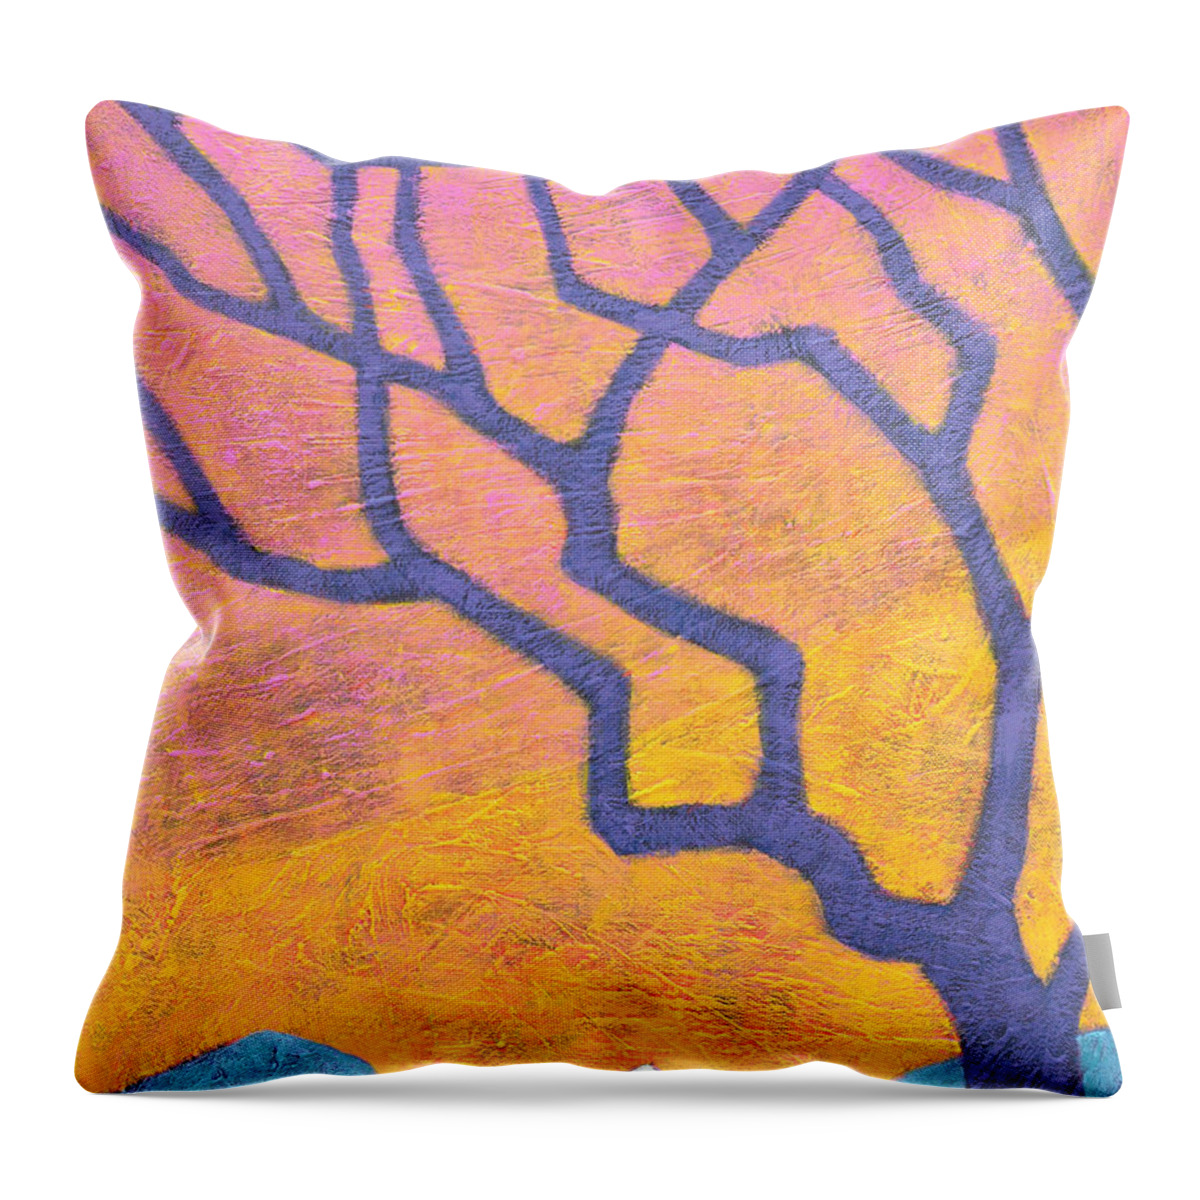 Landscape Throw Pillow featuring the painting Luminous Daybreak by Carrie MaKenna